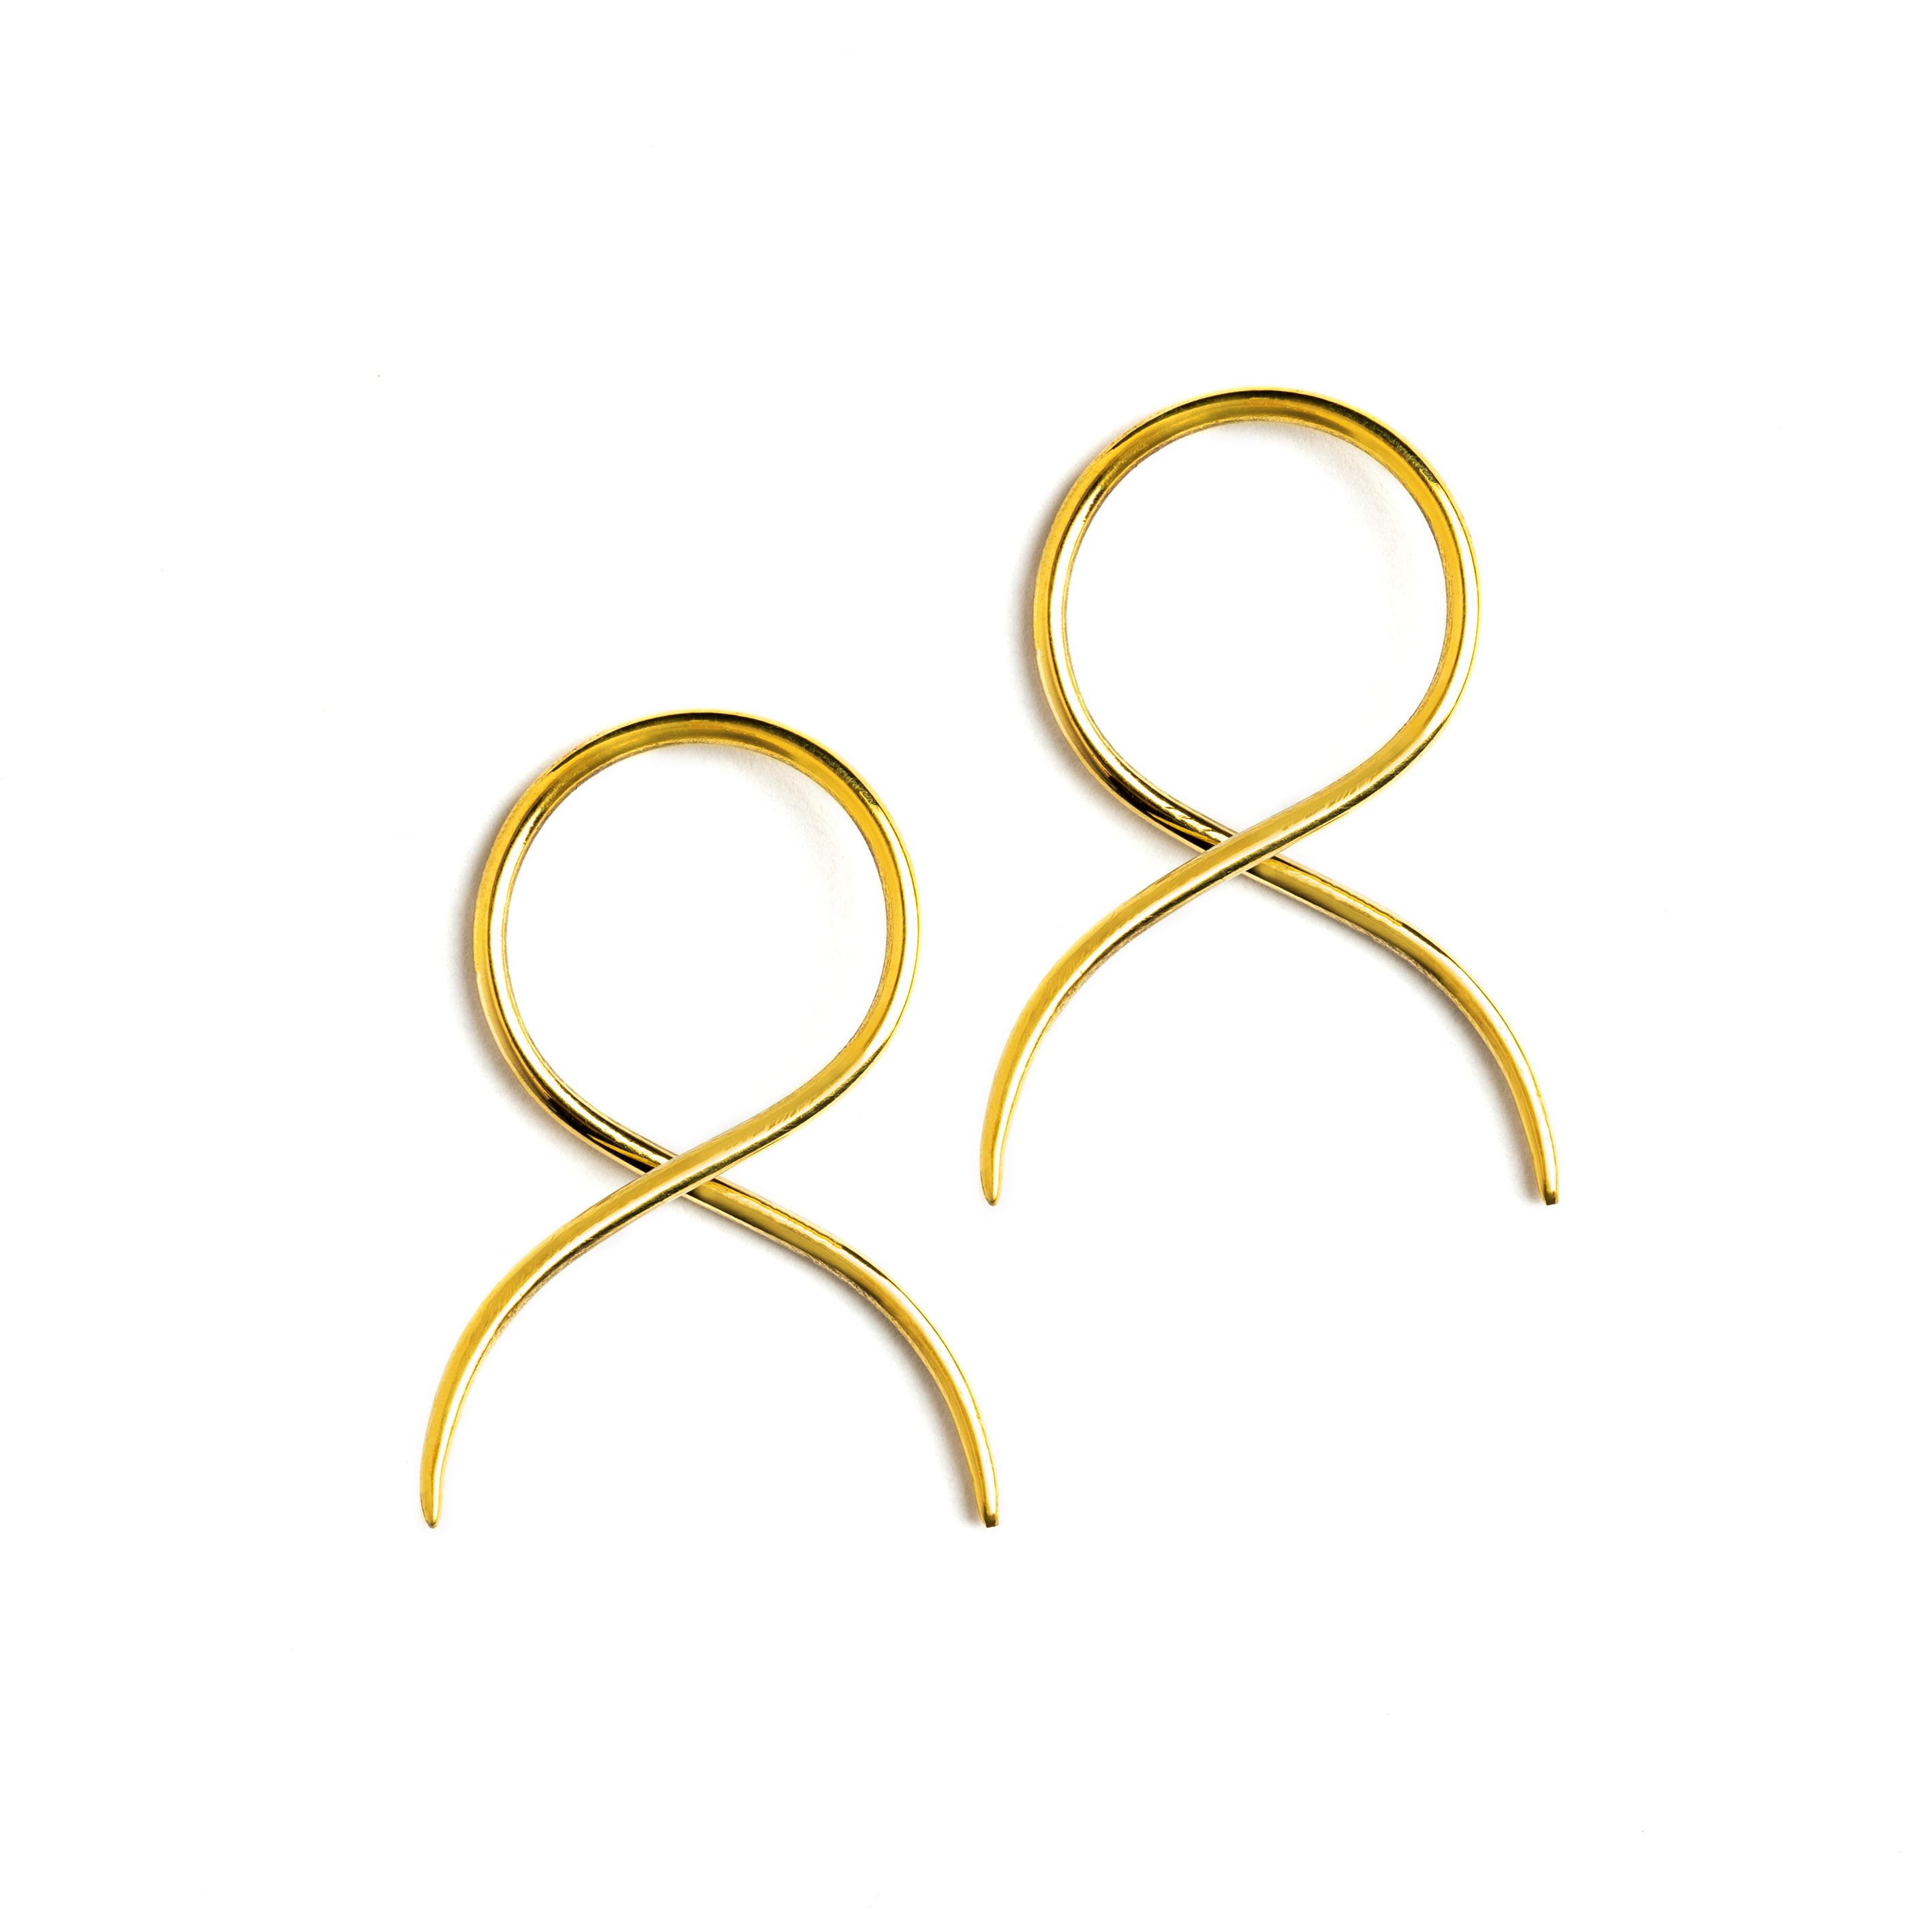 pair of golden brass wire twisted curved hook earrings side view